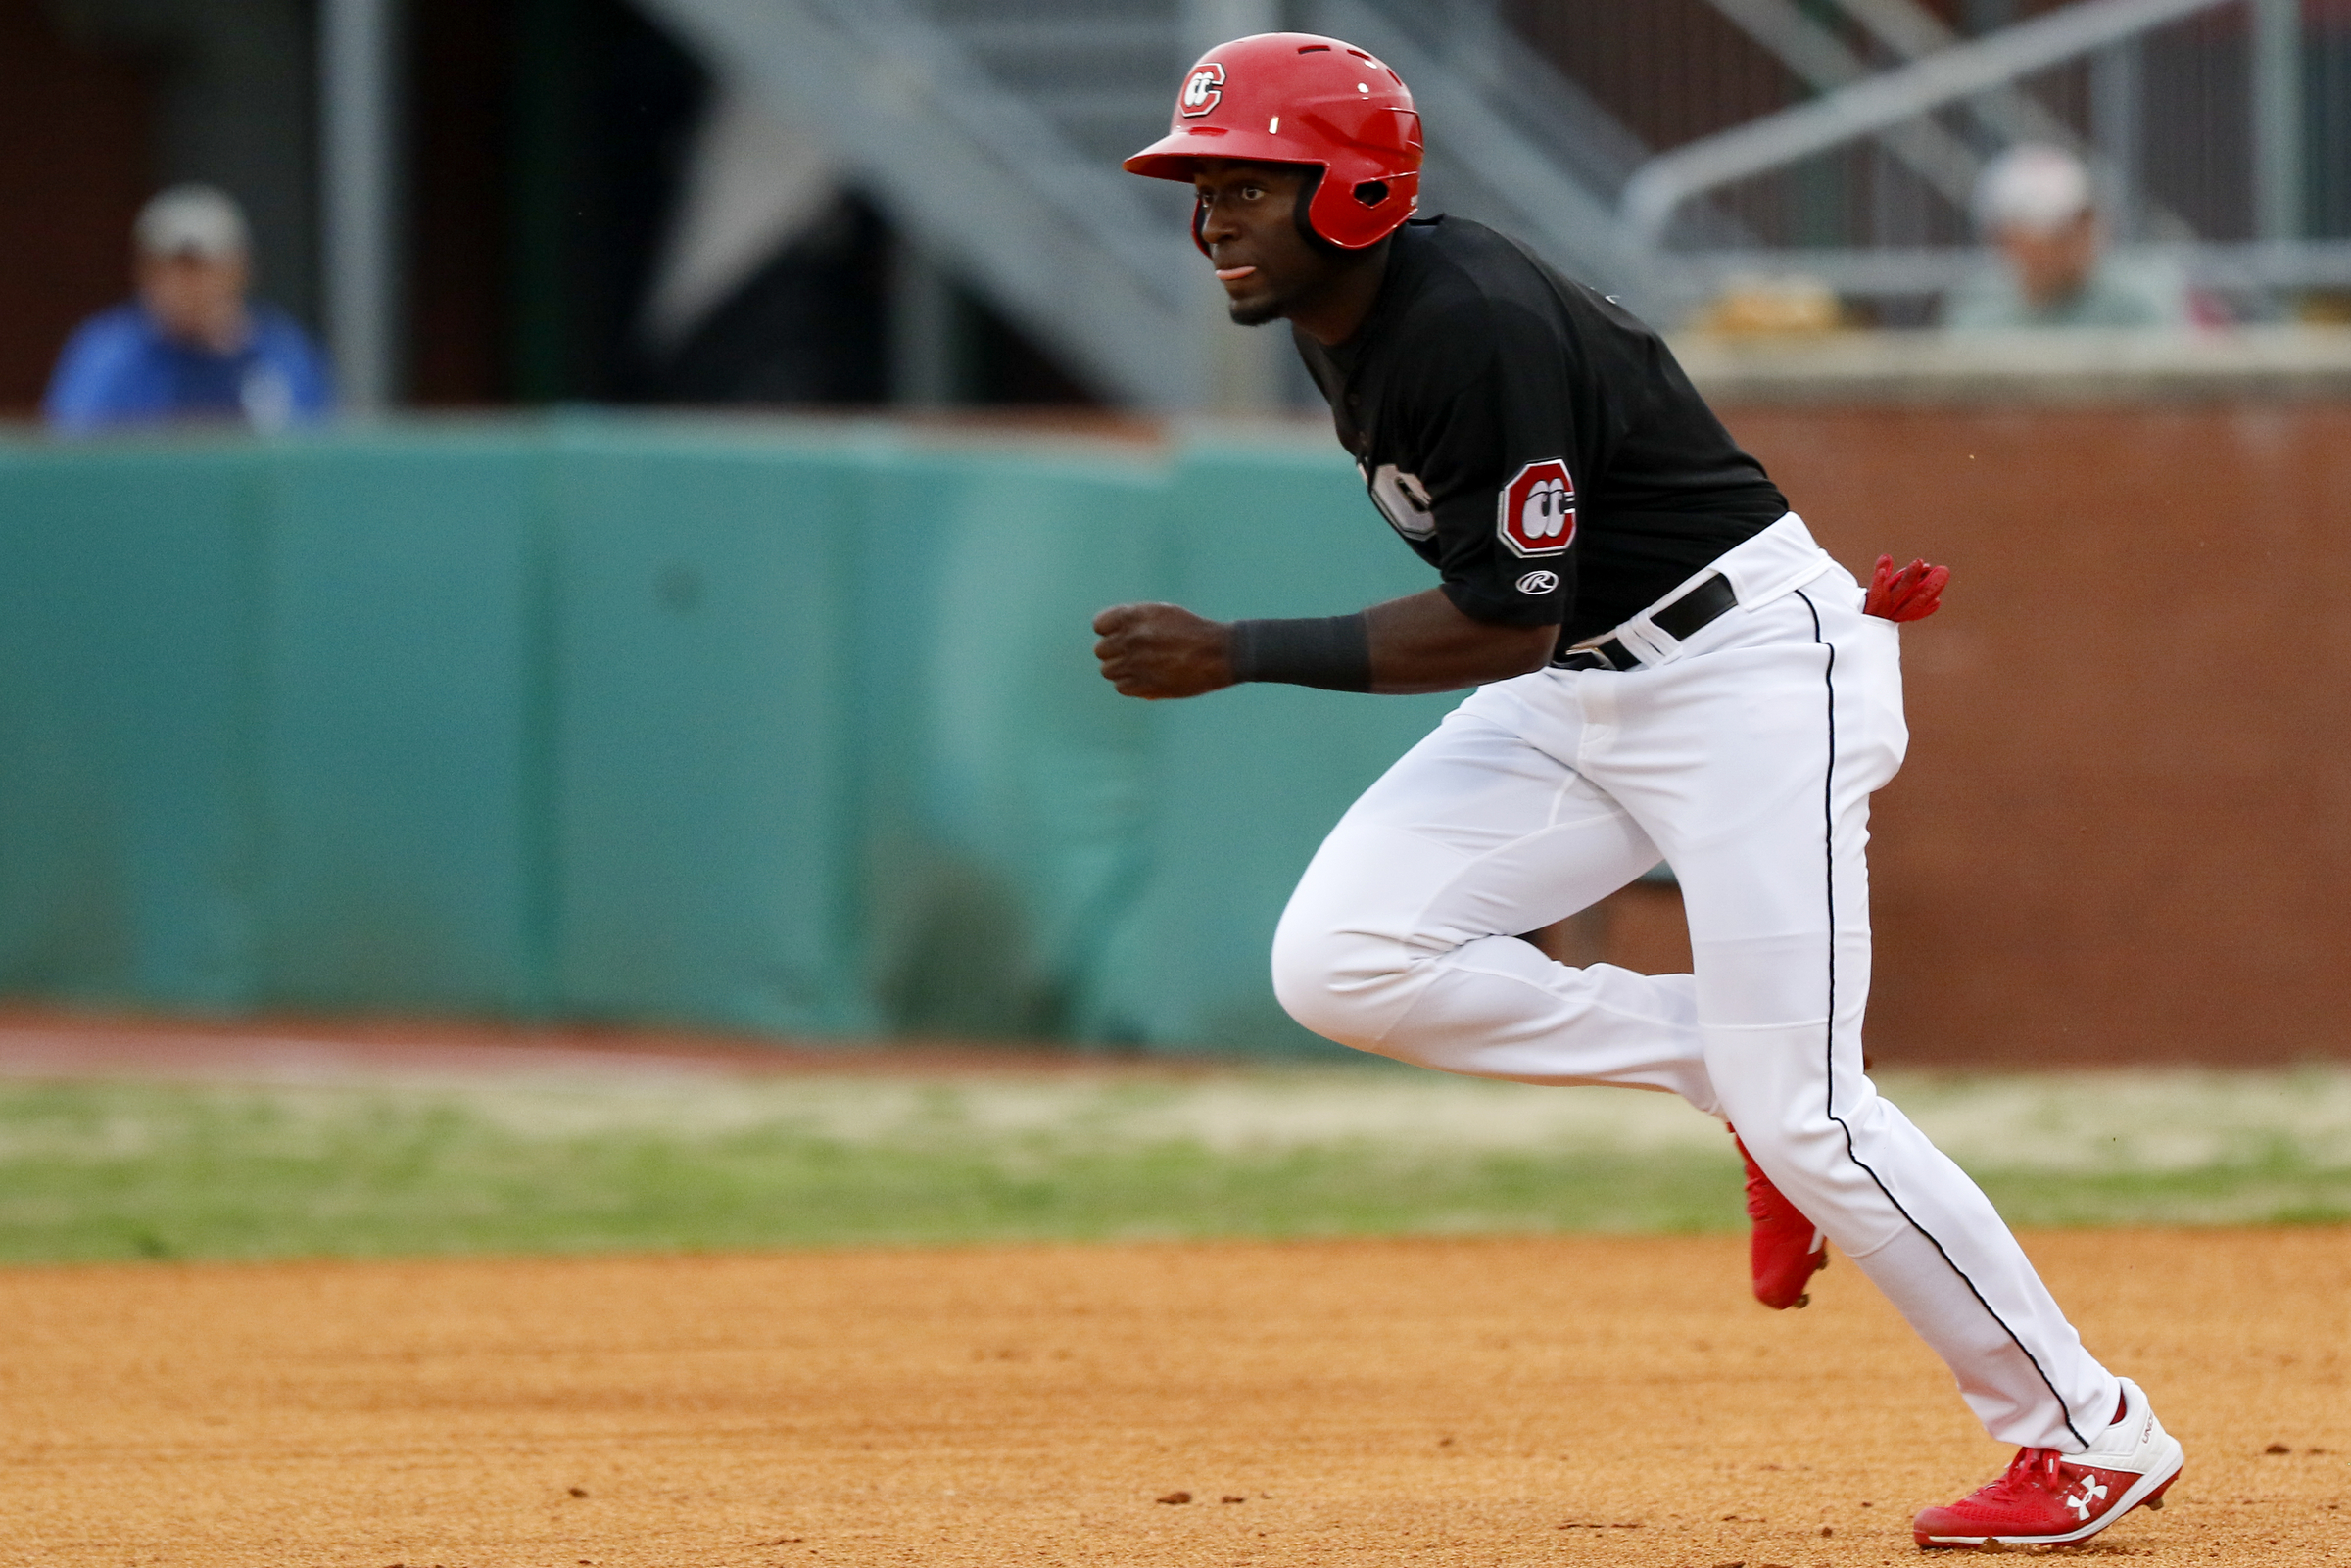 Left fielder Taylor Trammell expected to provide excitement for